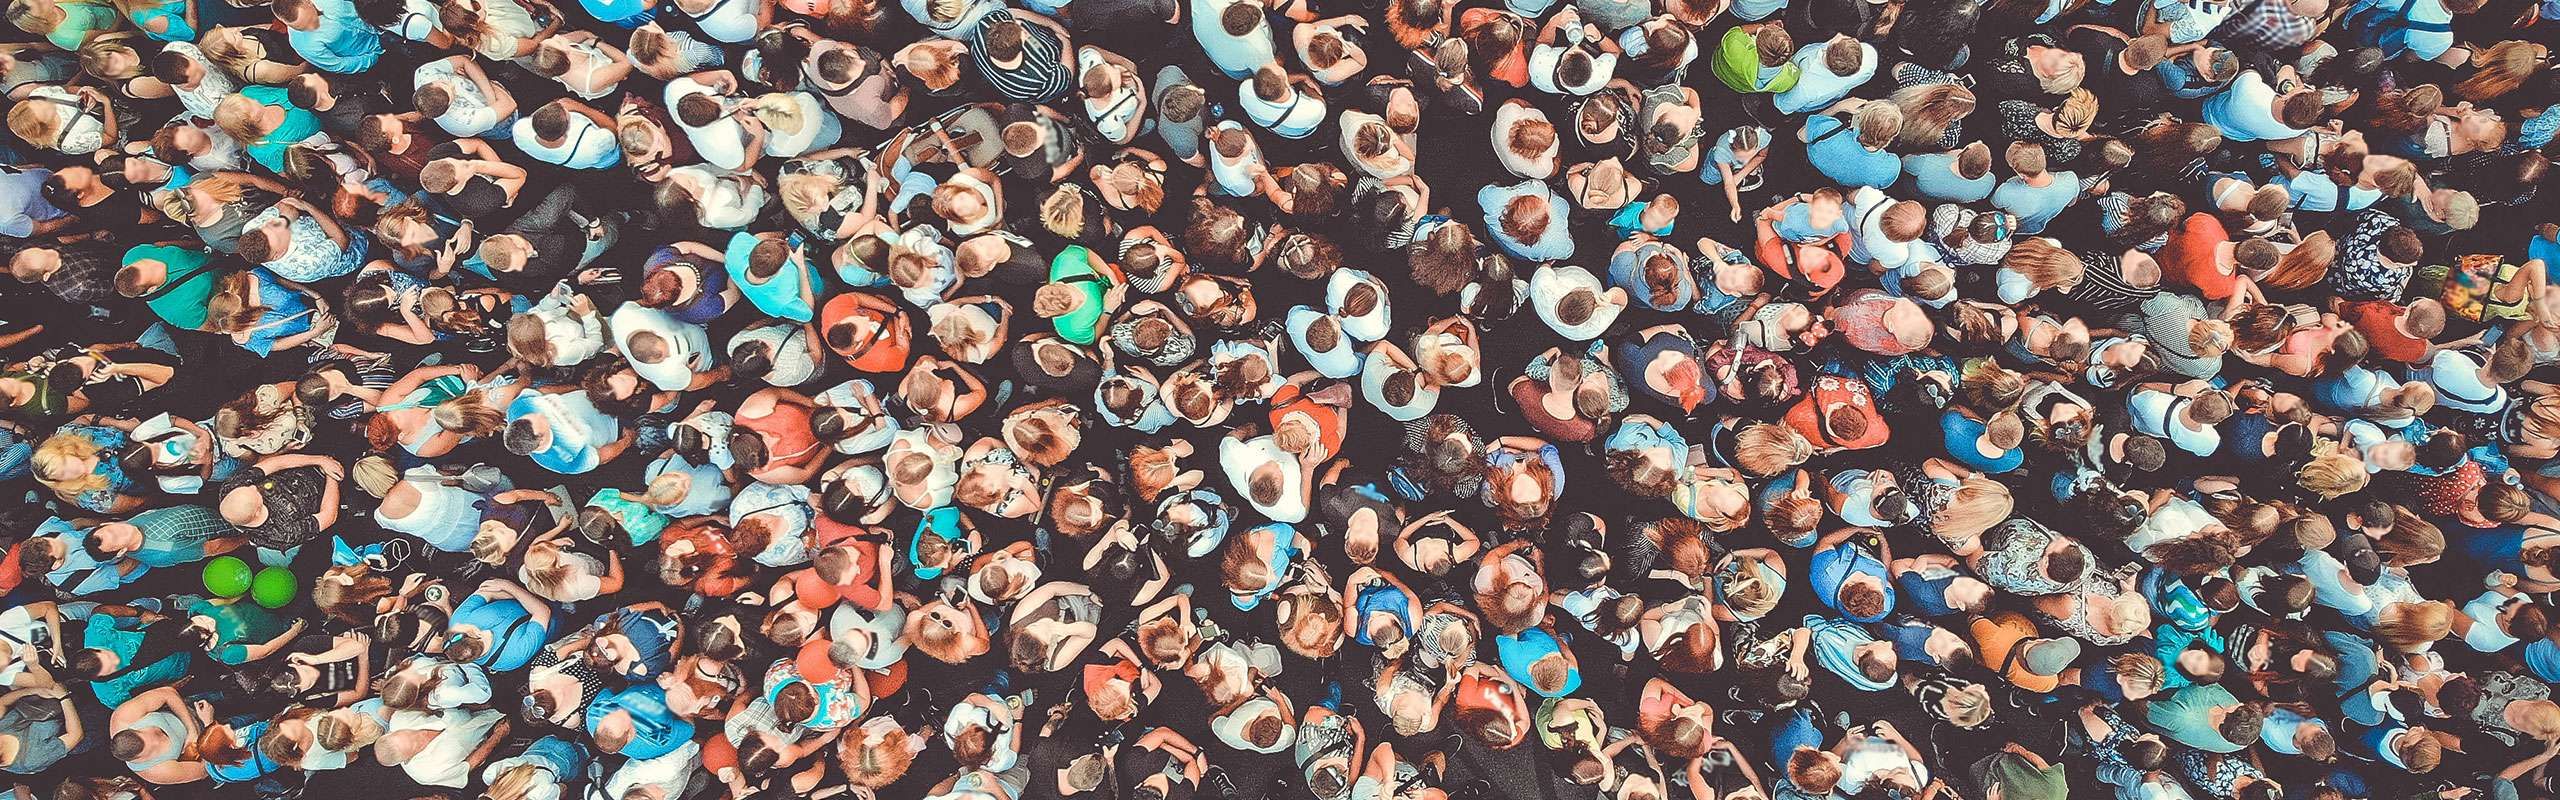 How to Make Your Website Stand Out From the Crowd